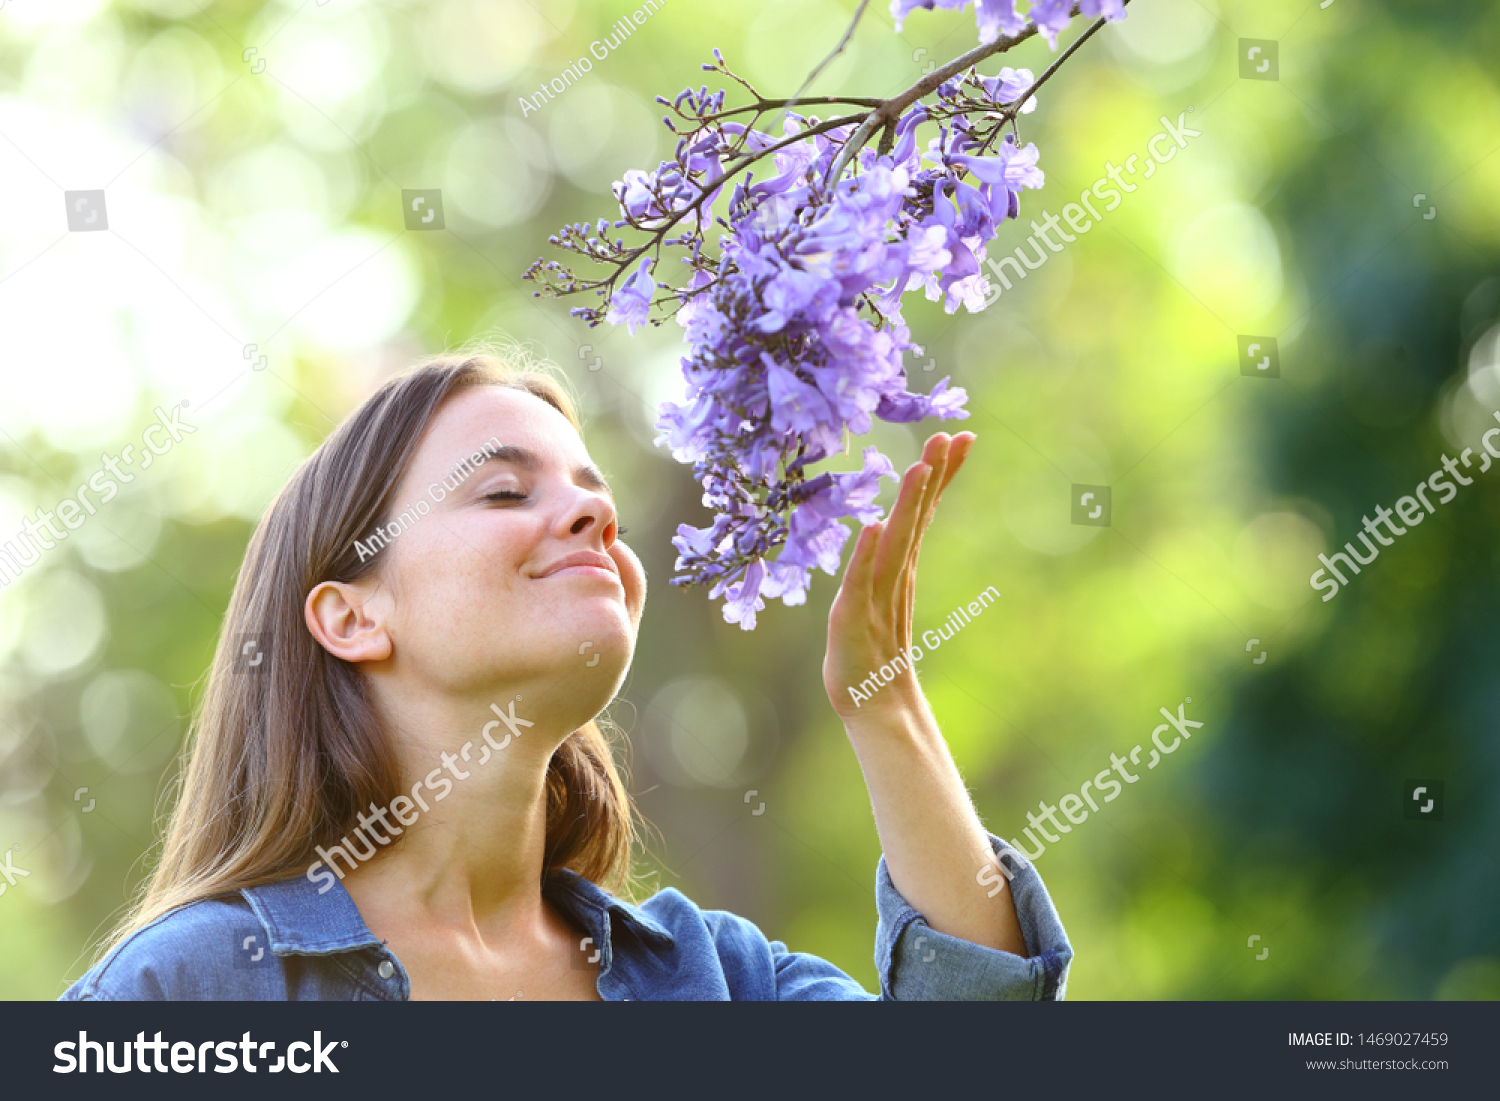 Candid woman smelling flowers standing in a park #1469027459